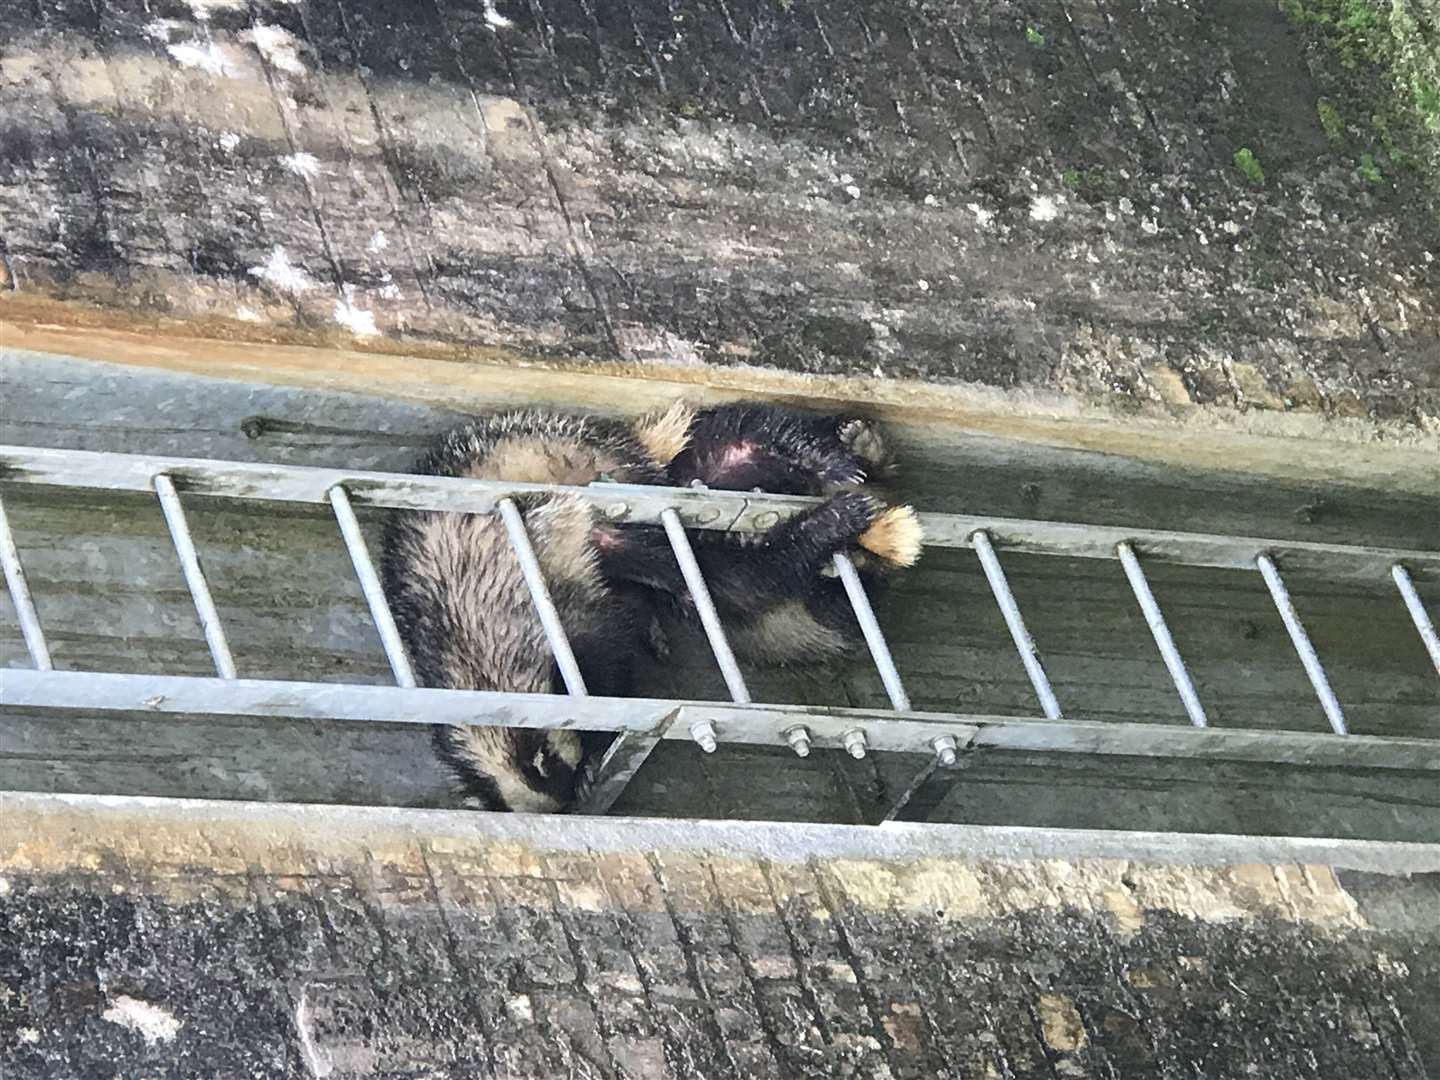 In Torfaen, Wales, a pair of badgers needed rescuing after getting trapped on a ladder in a canal (RSPCA/PA)